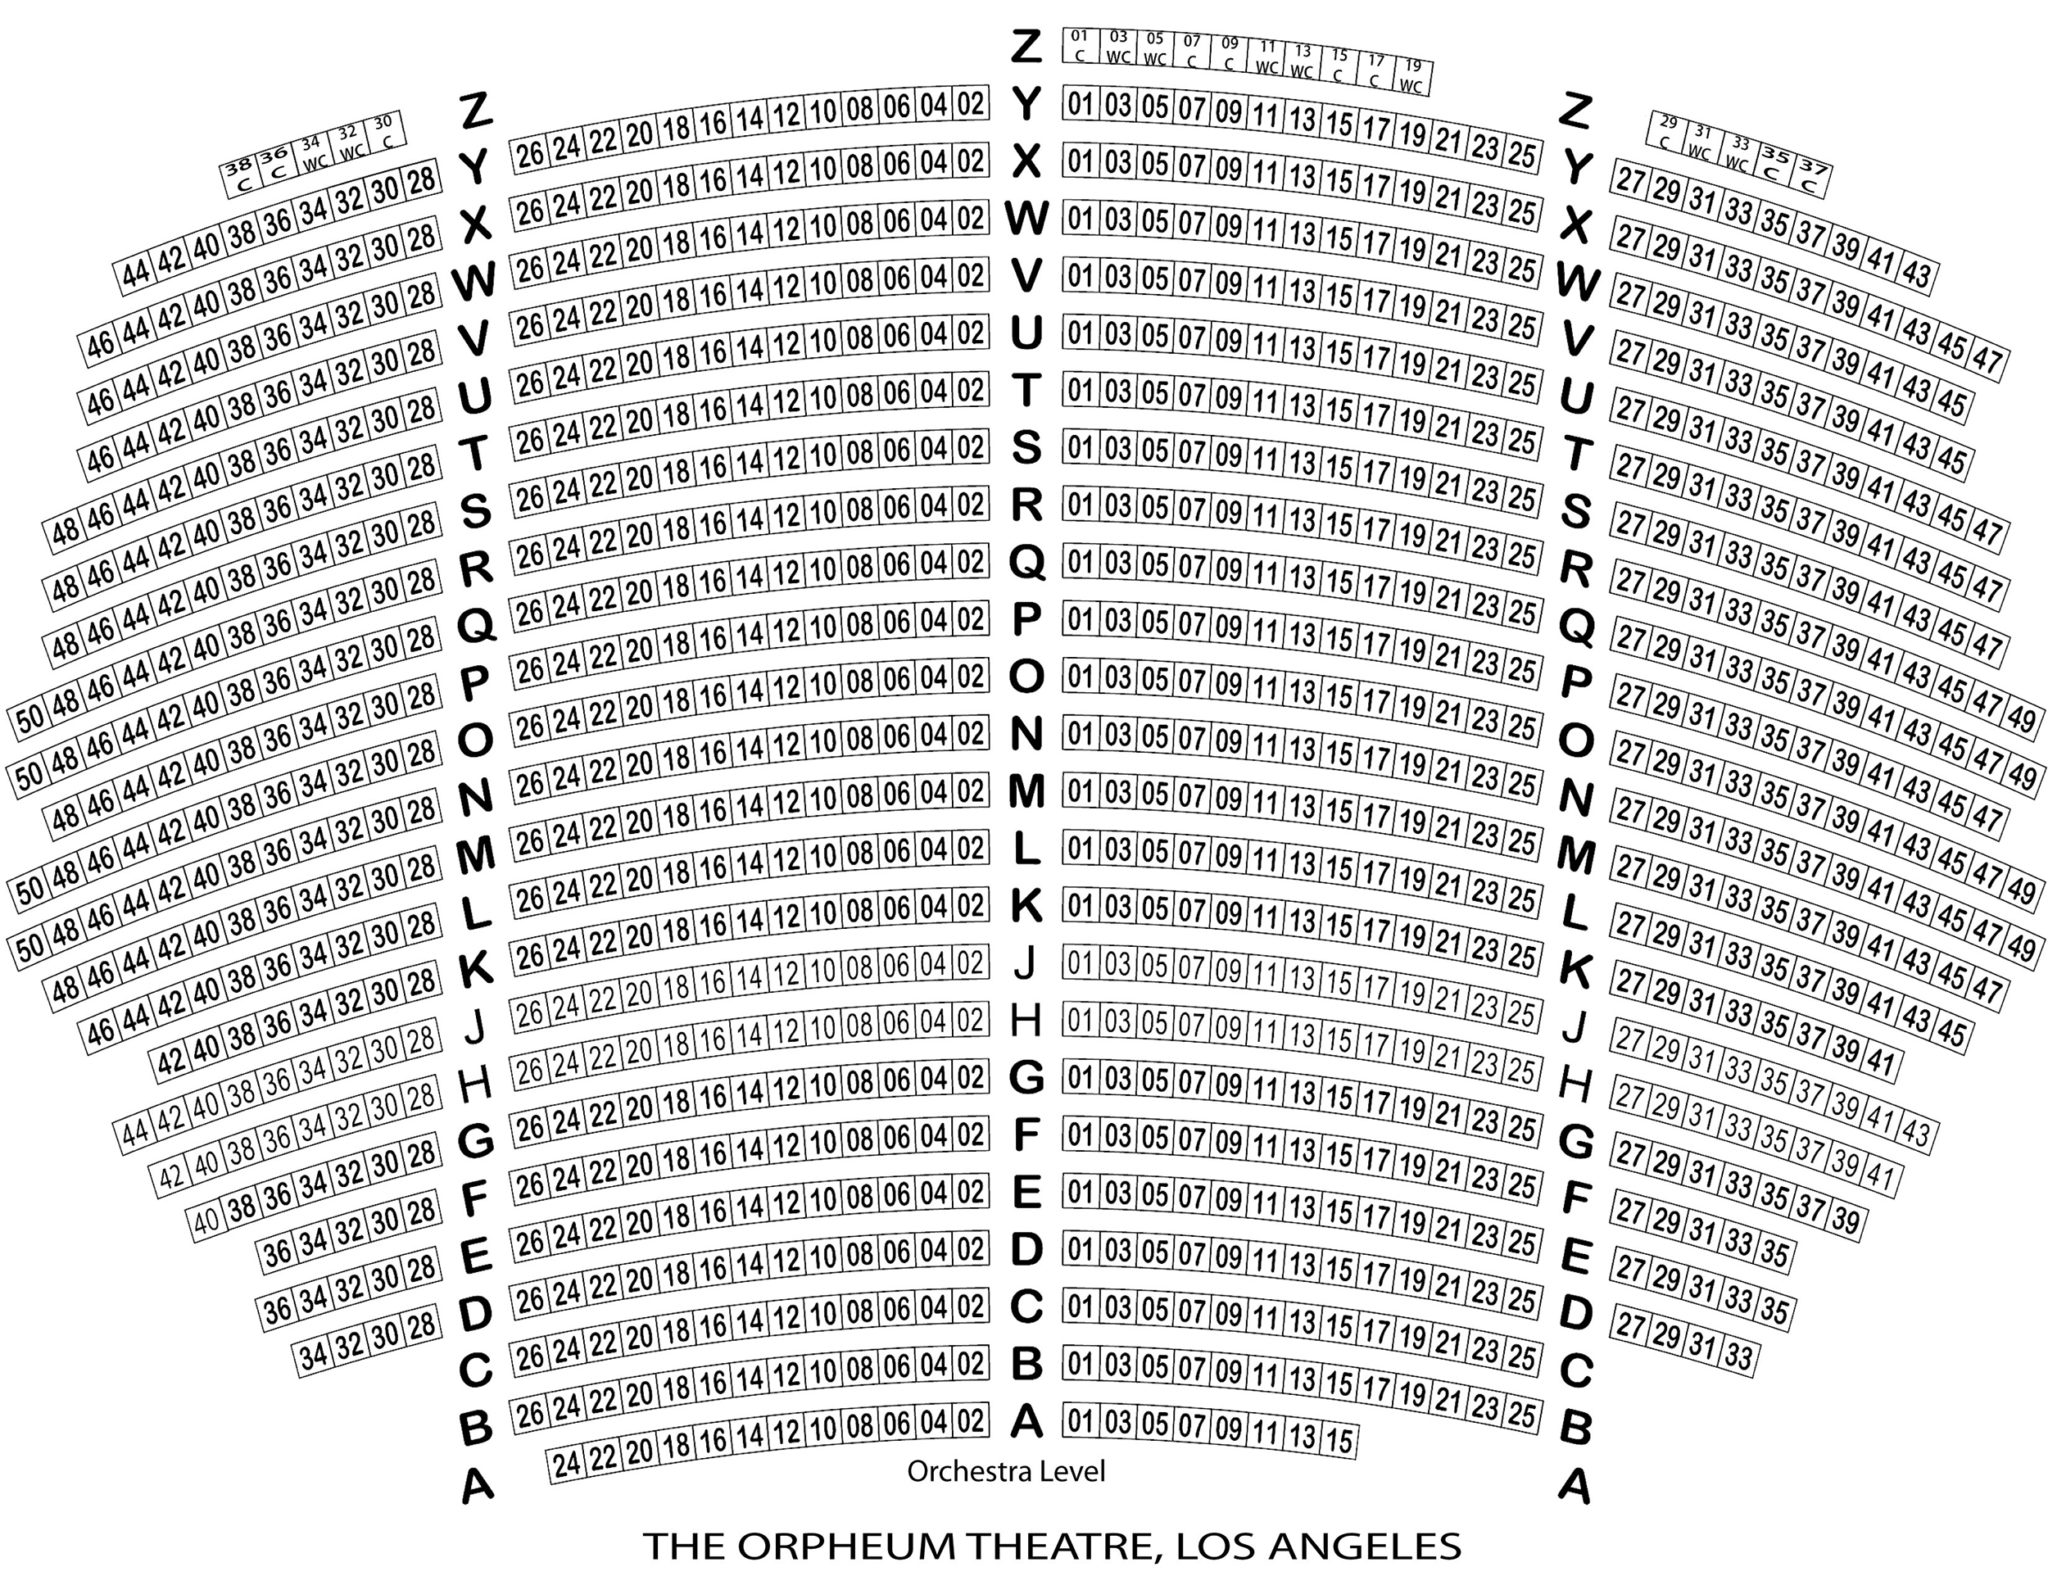 Seating Orchestra Level.